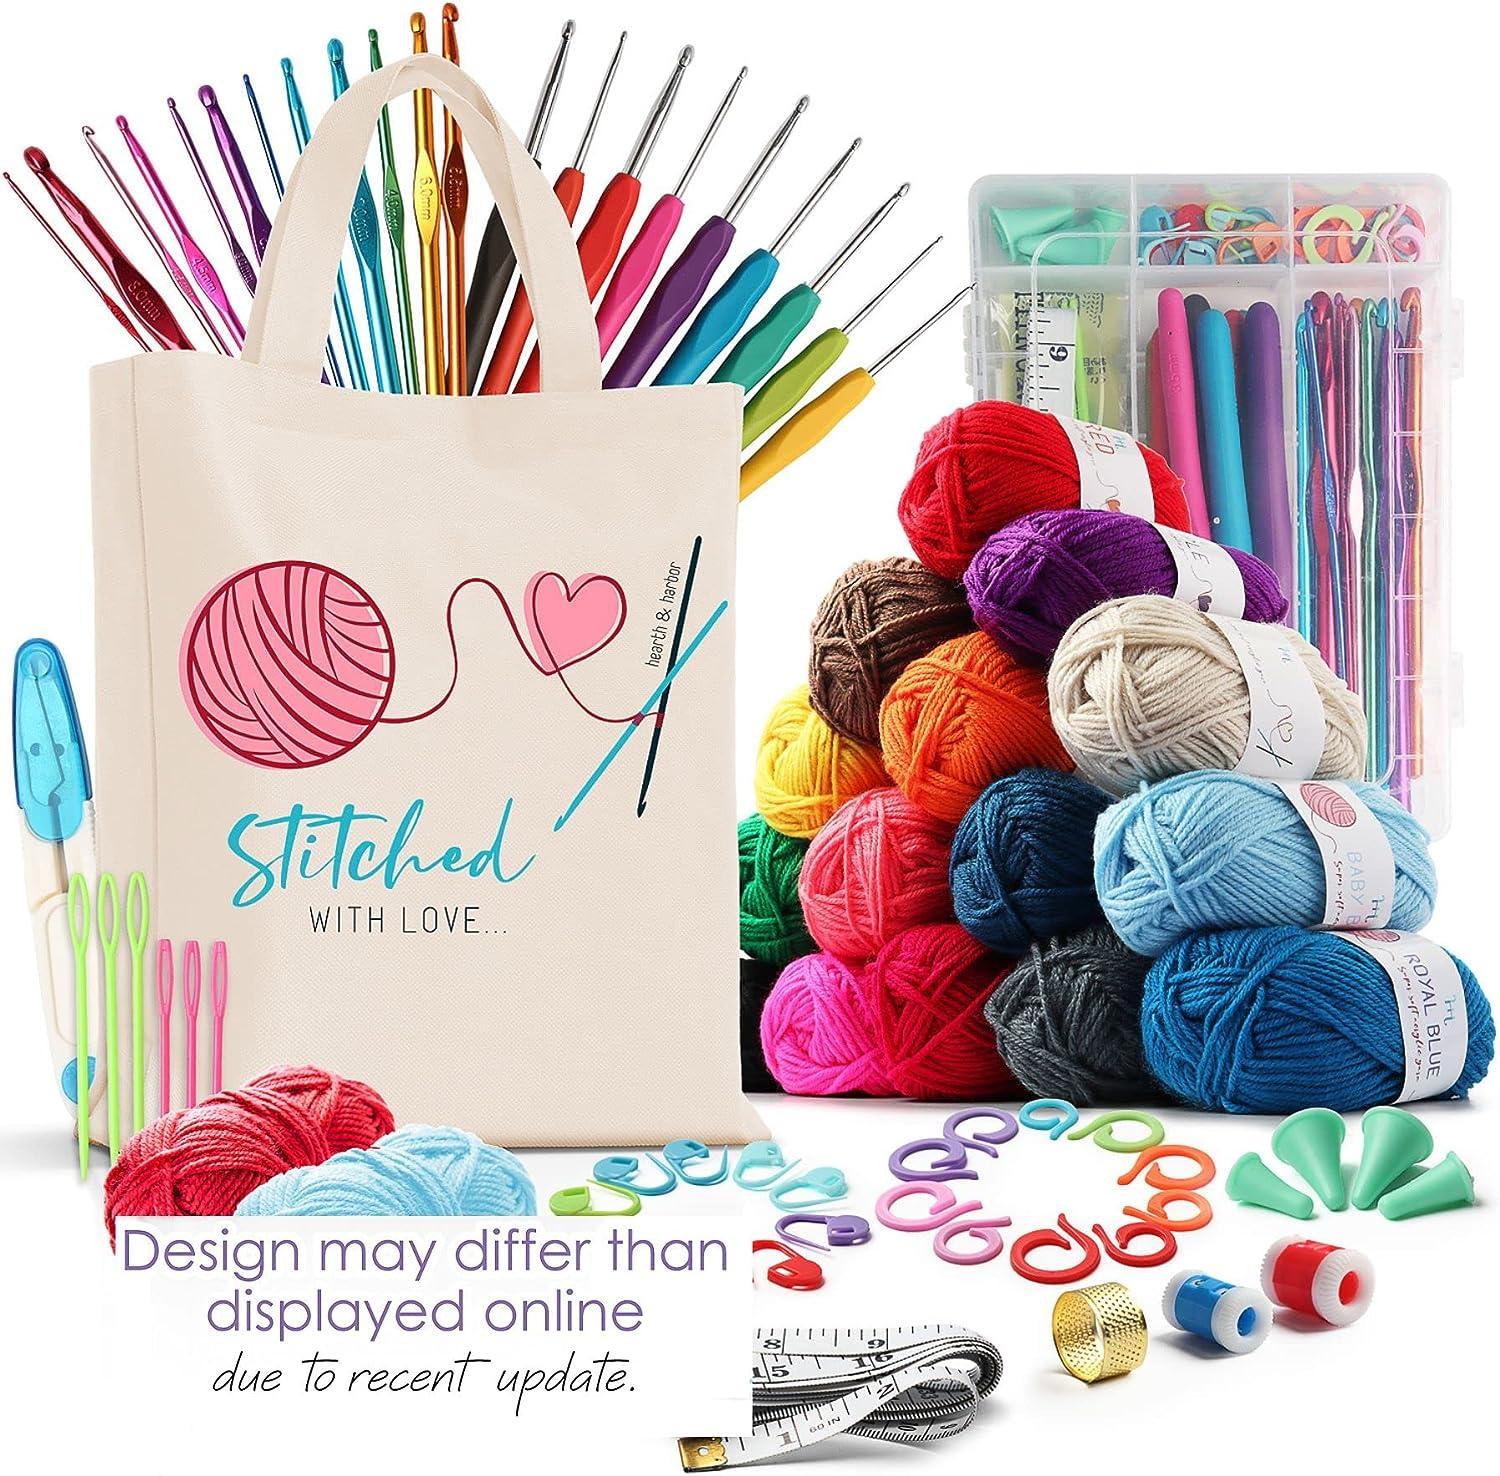 73 Piece Crochet Kit with Crochet Hooks Yarn Set - Premium Bundle Includes  Yarn Balls, Needles, Accessories Kit, Canvas Tote Bag and Lot More -  Starter Pack for Kids Adults Beginner, Professionals. Large